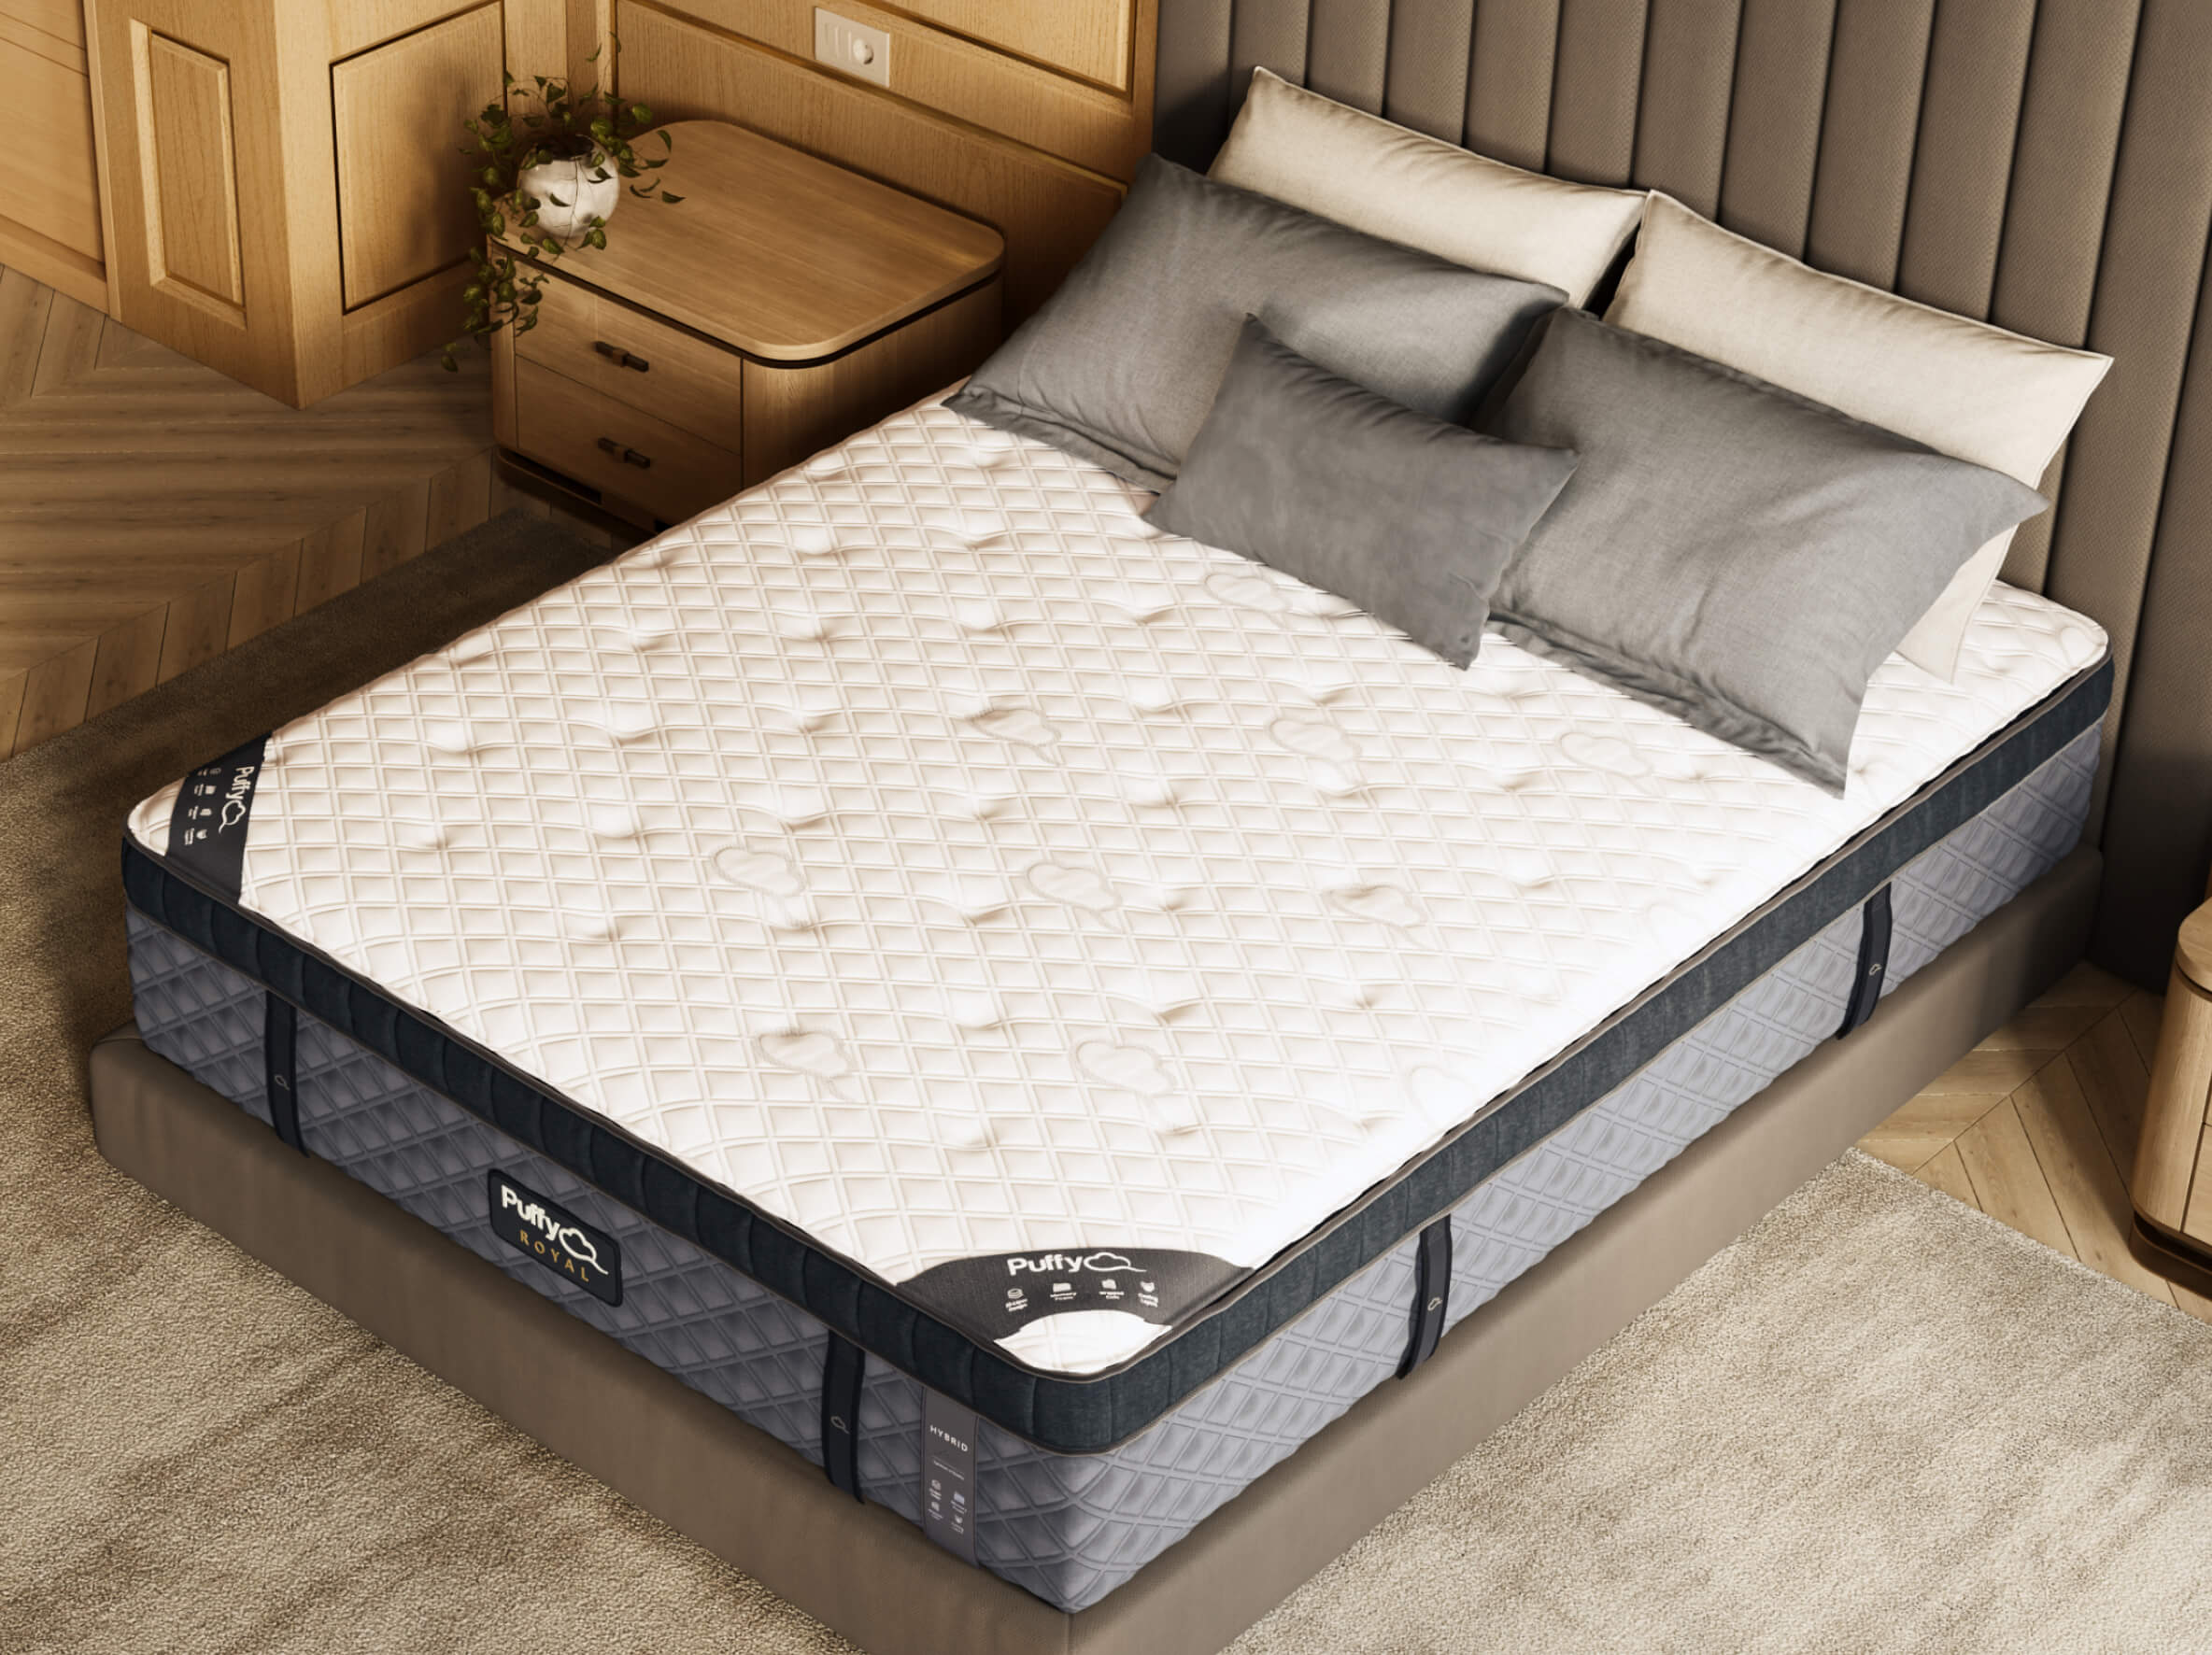 A Shared Space of Comfort: The Best Luxury Mattress for Couples